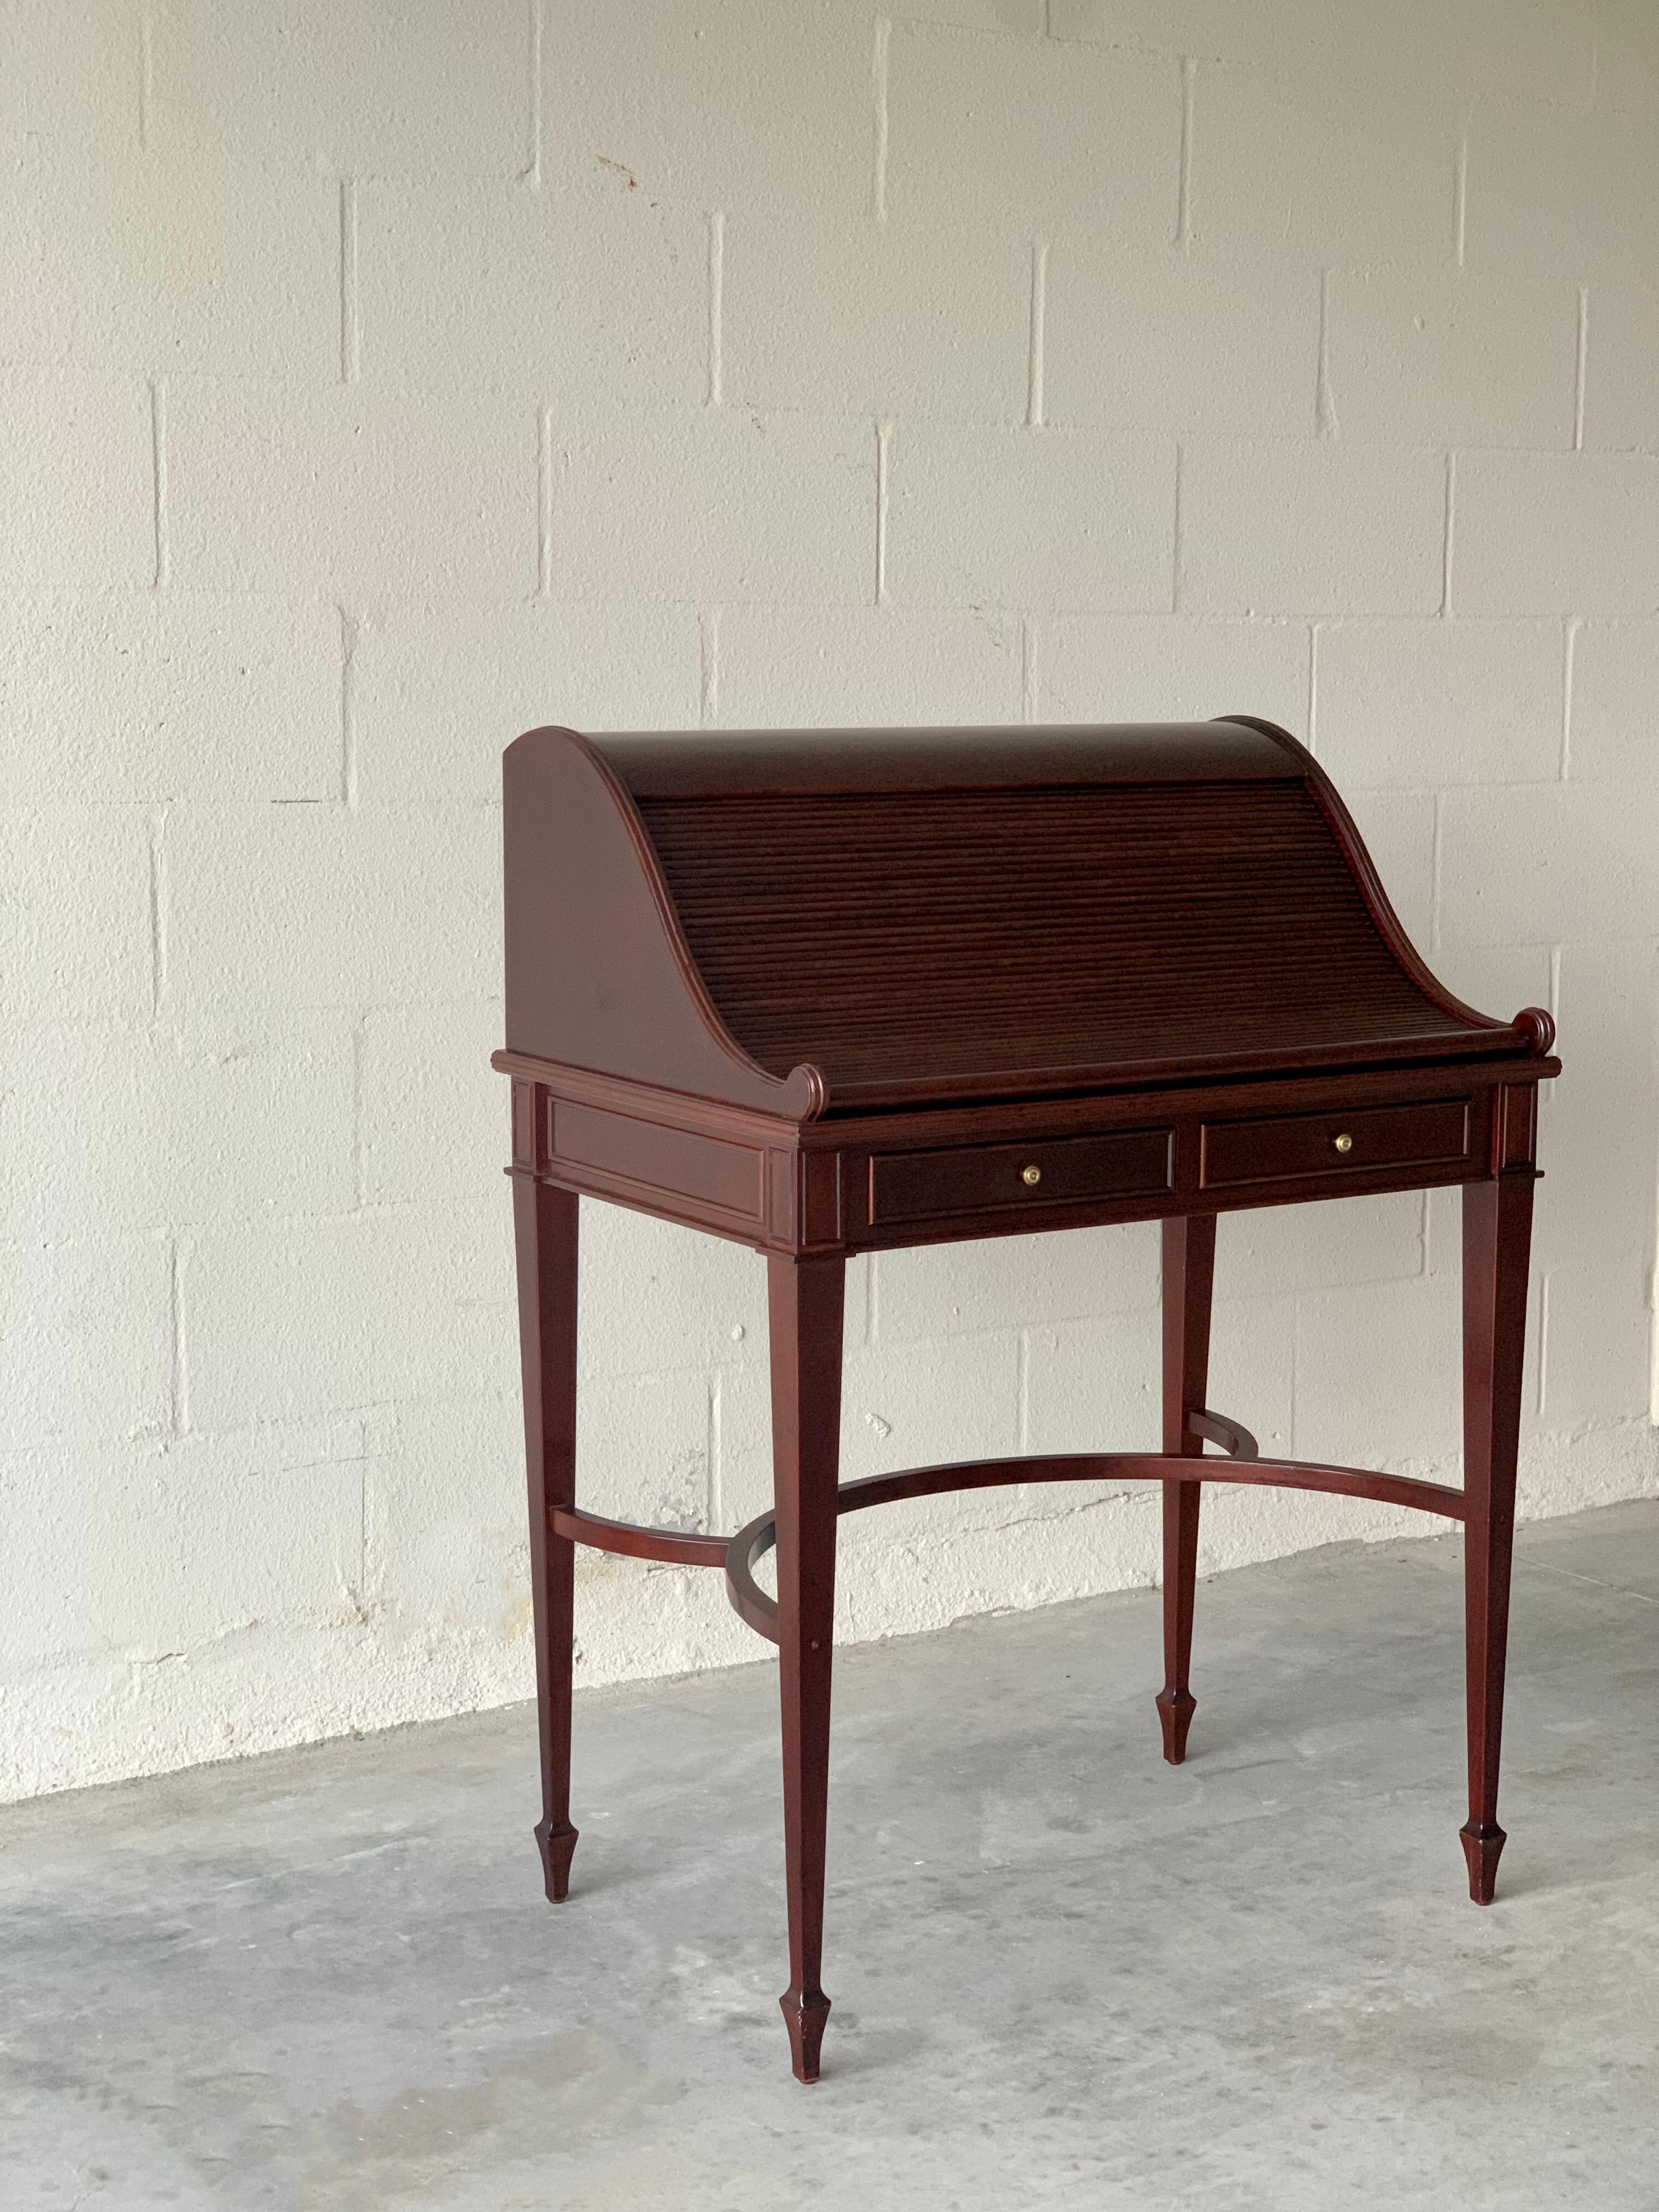 Secretary desk by Bombay Furniture Co. Beautiful veneer mahogany finish. Dated 2004. Table maintains it s sturdy structure, with good wood surface condition despite age. Roll top opens to an inlaid leather writing surface.

DIMENSIONS:
30ʺ Width ×